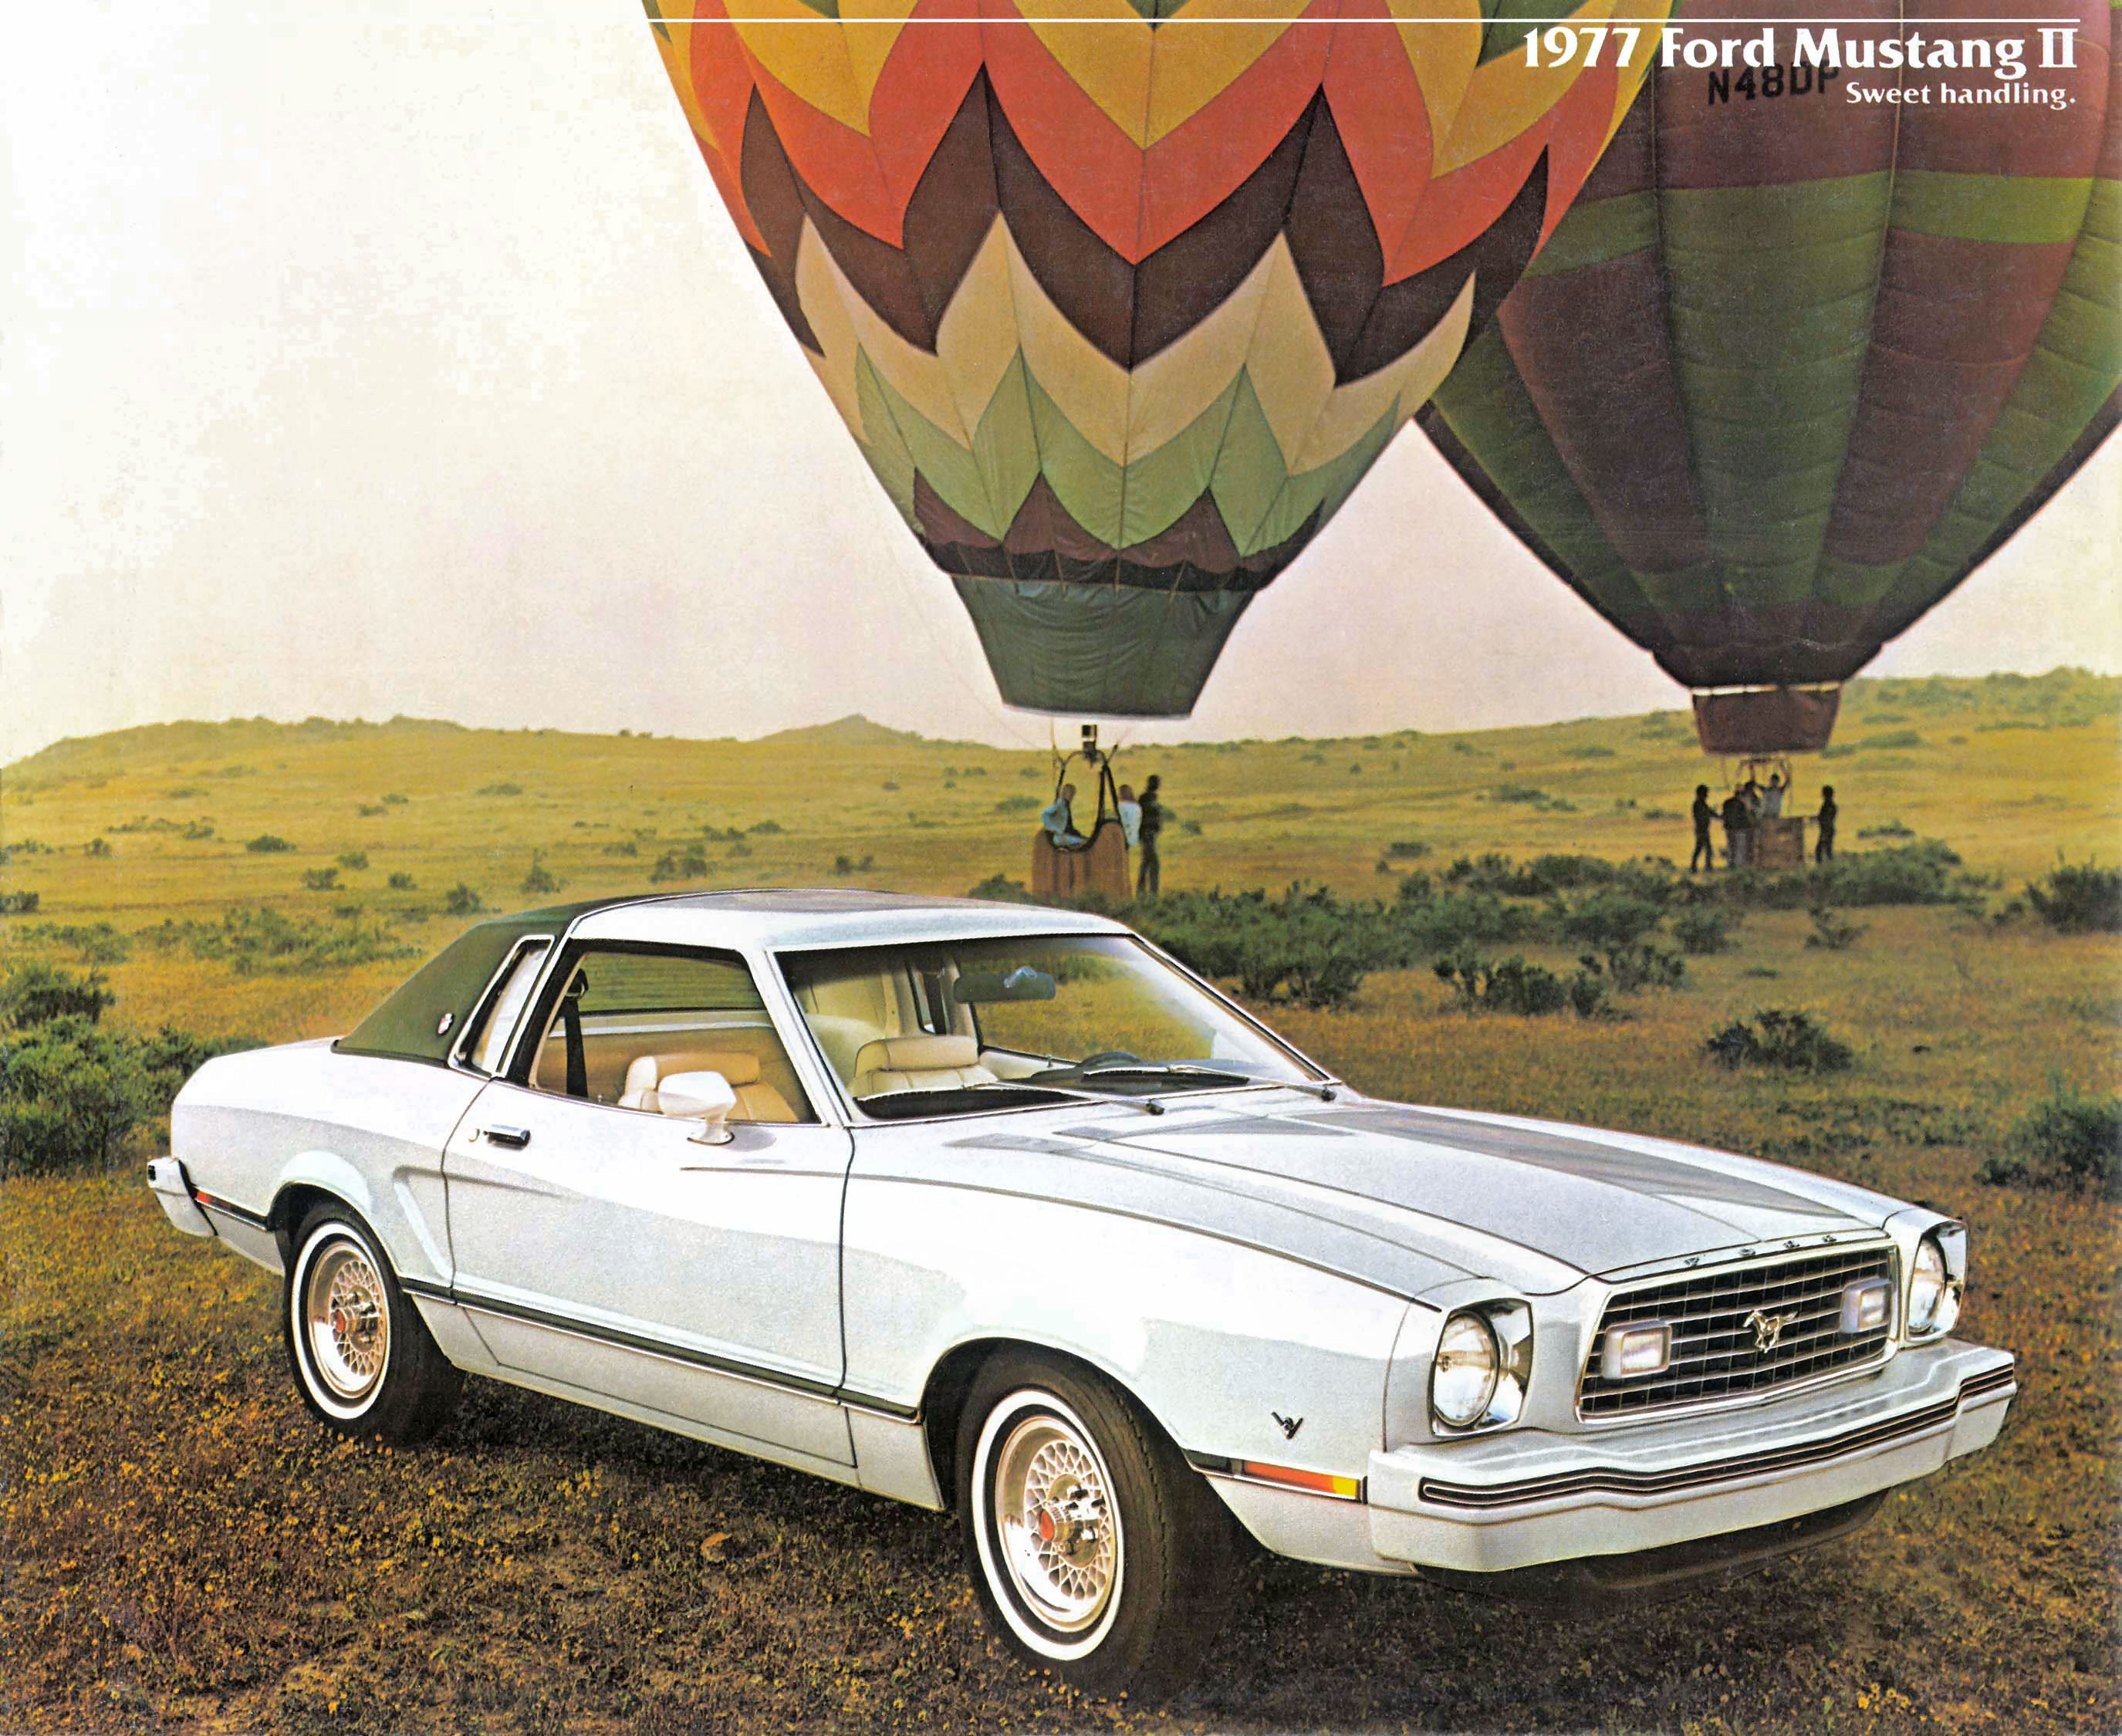 1977_Ford_Mustang_II-01